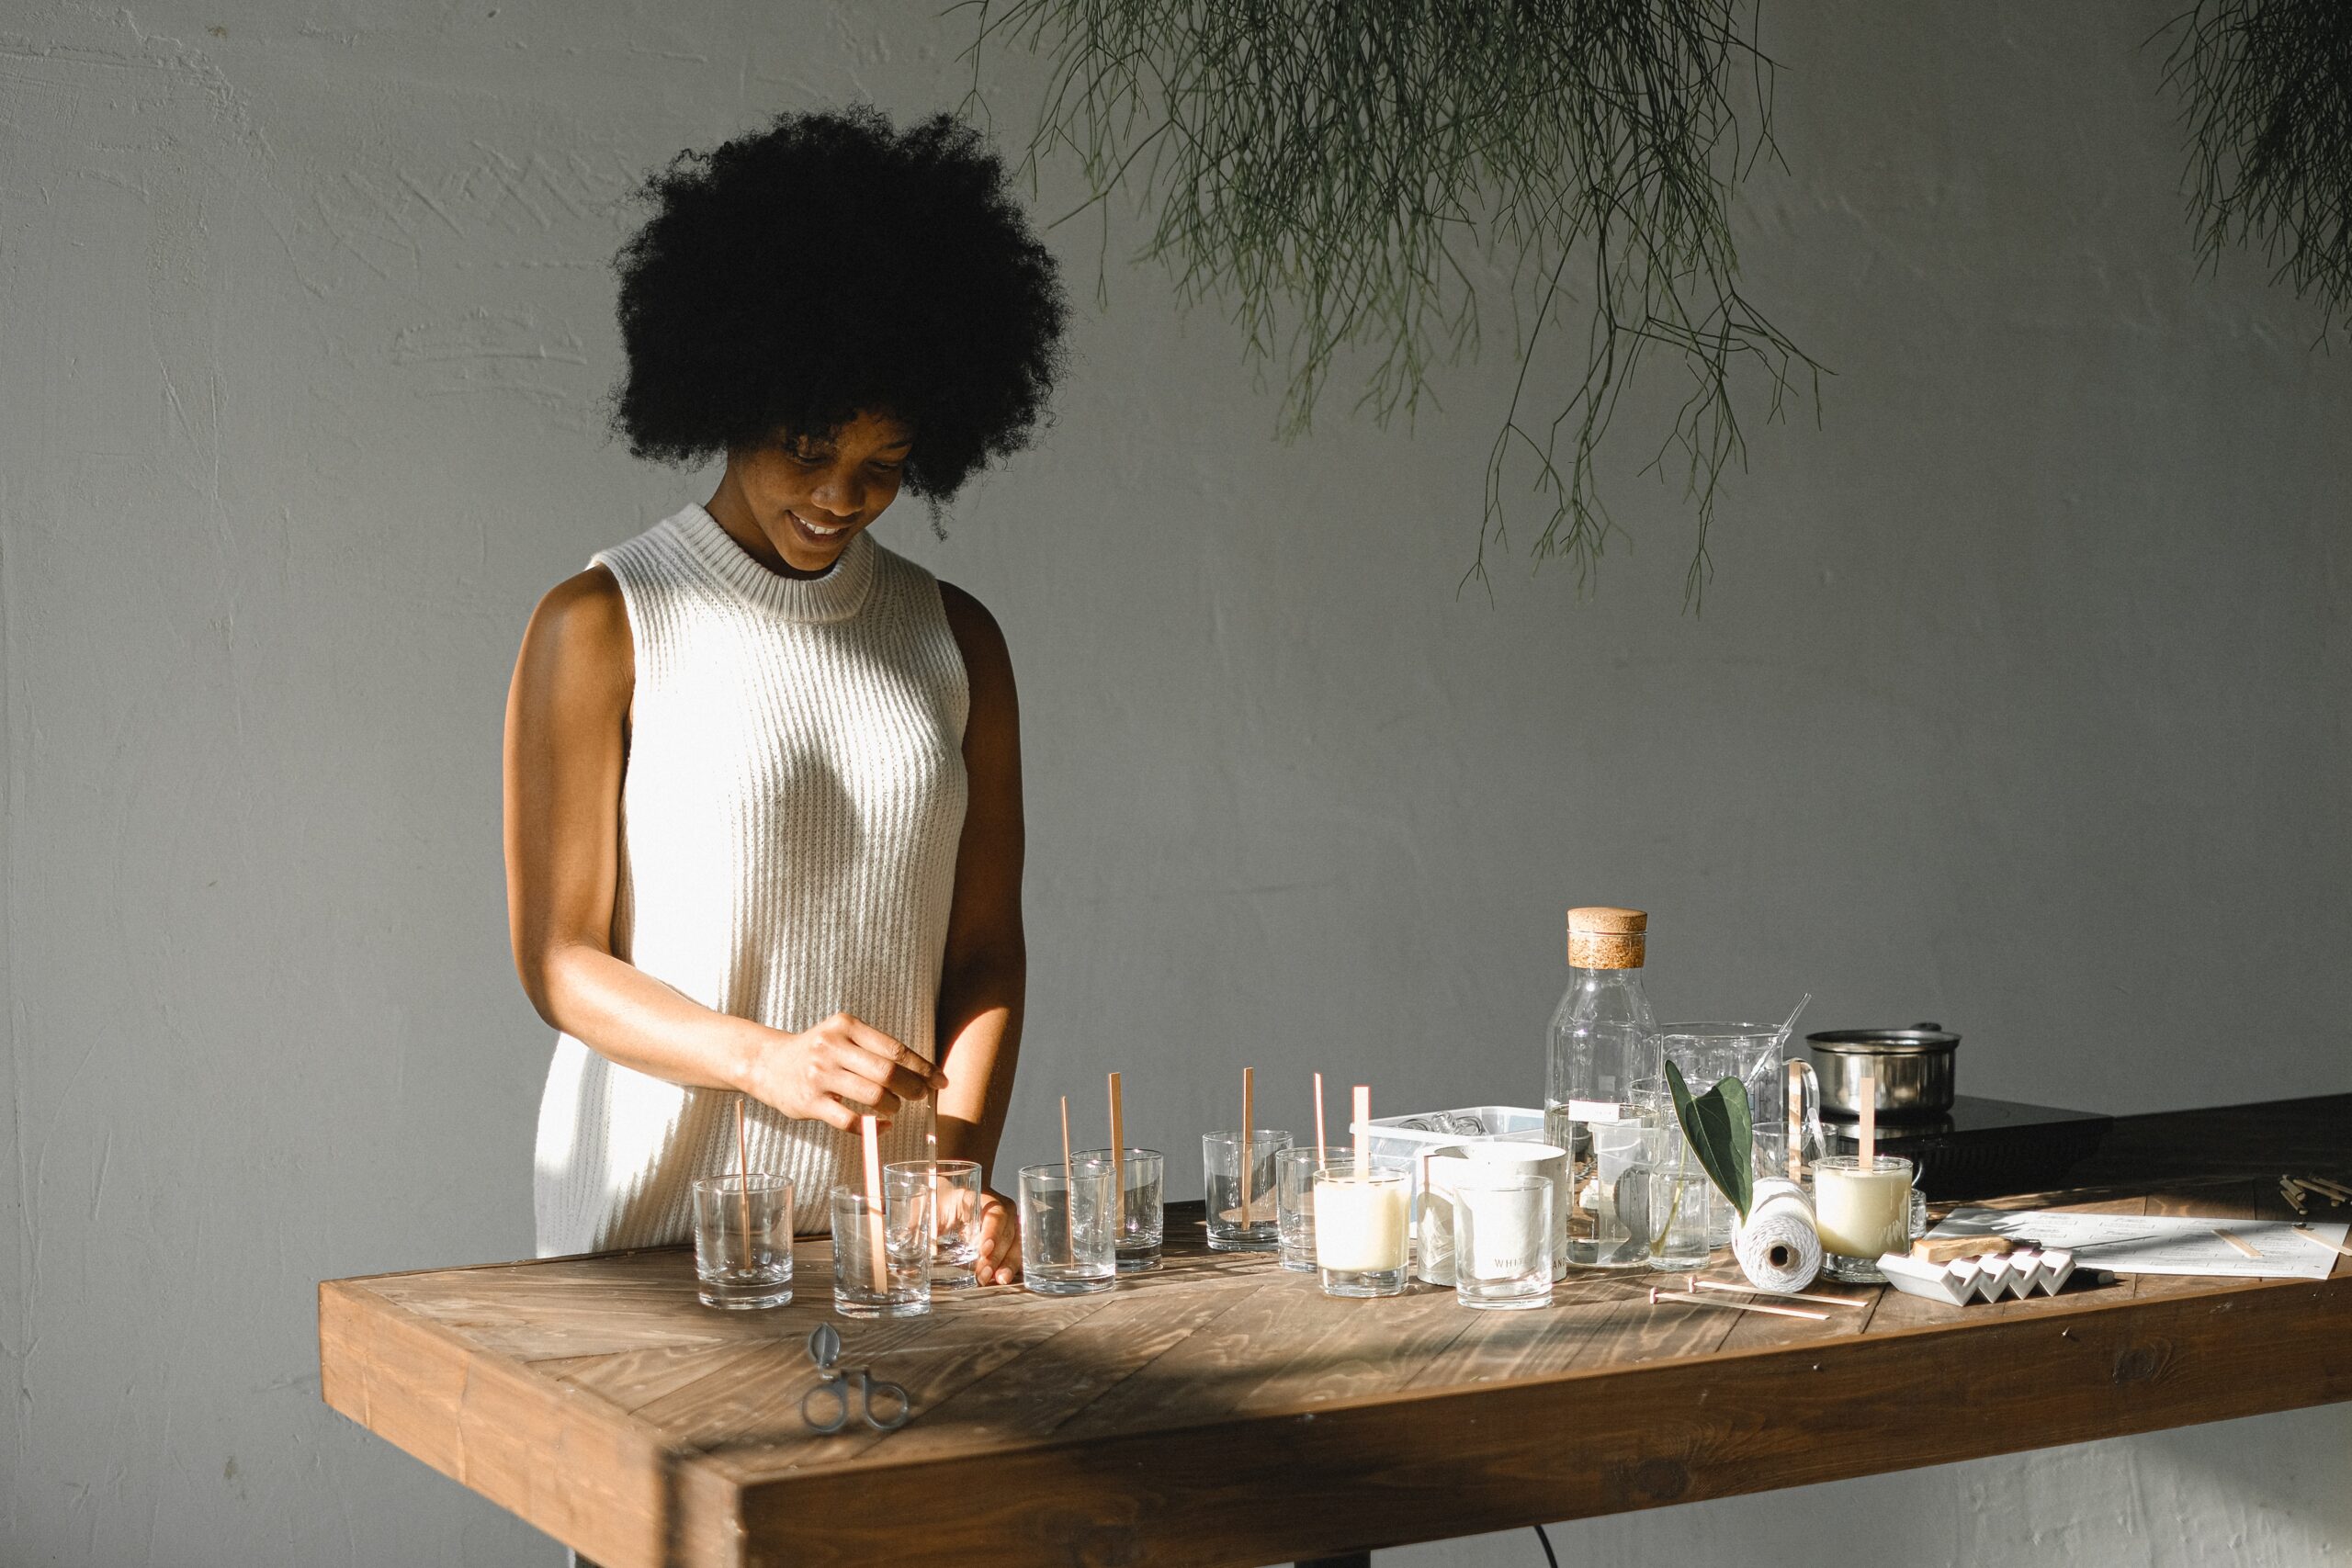 Candle Making Kits to Elevate the Vibe of Your Home